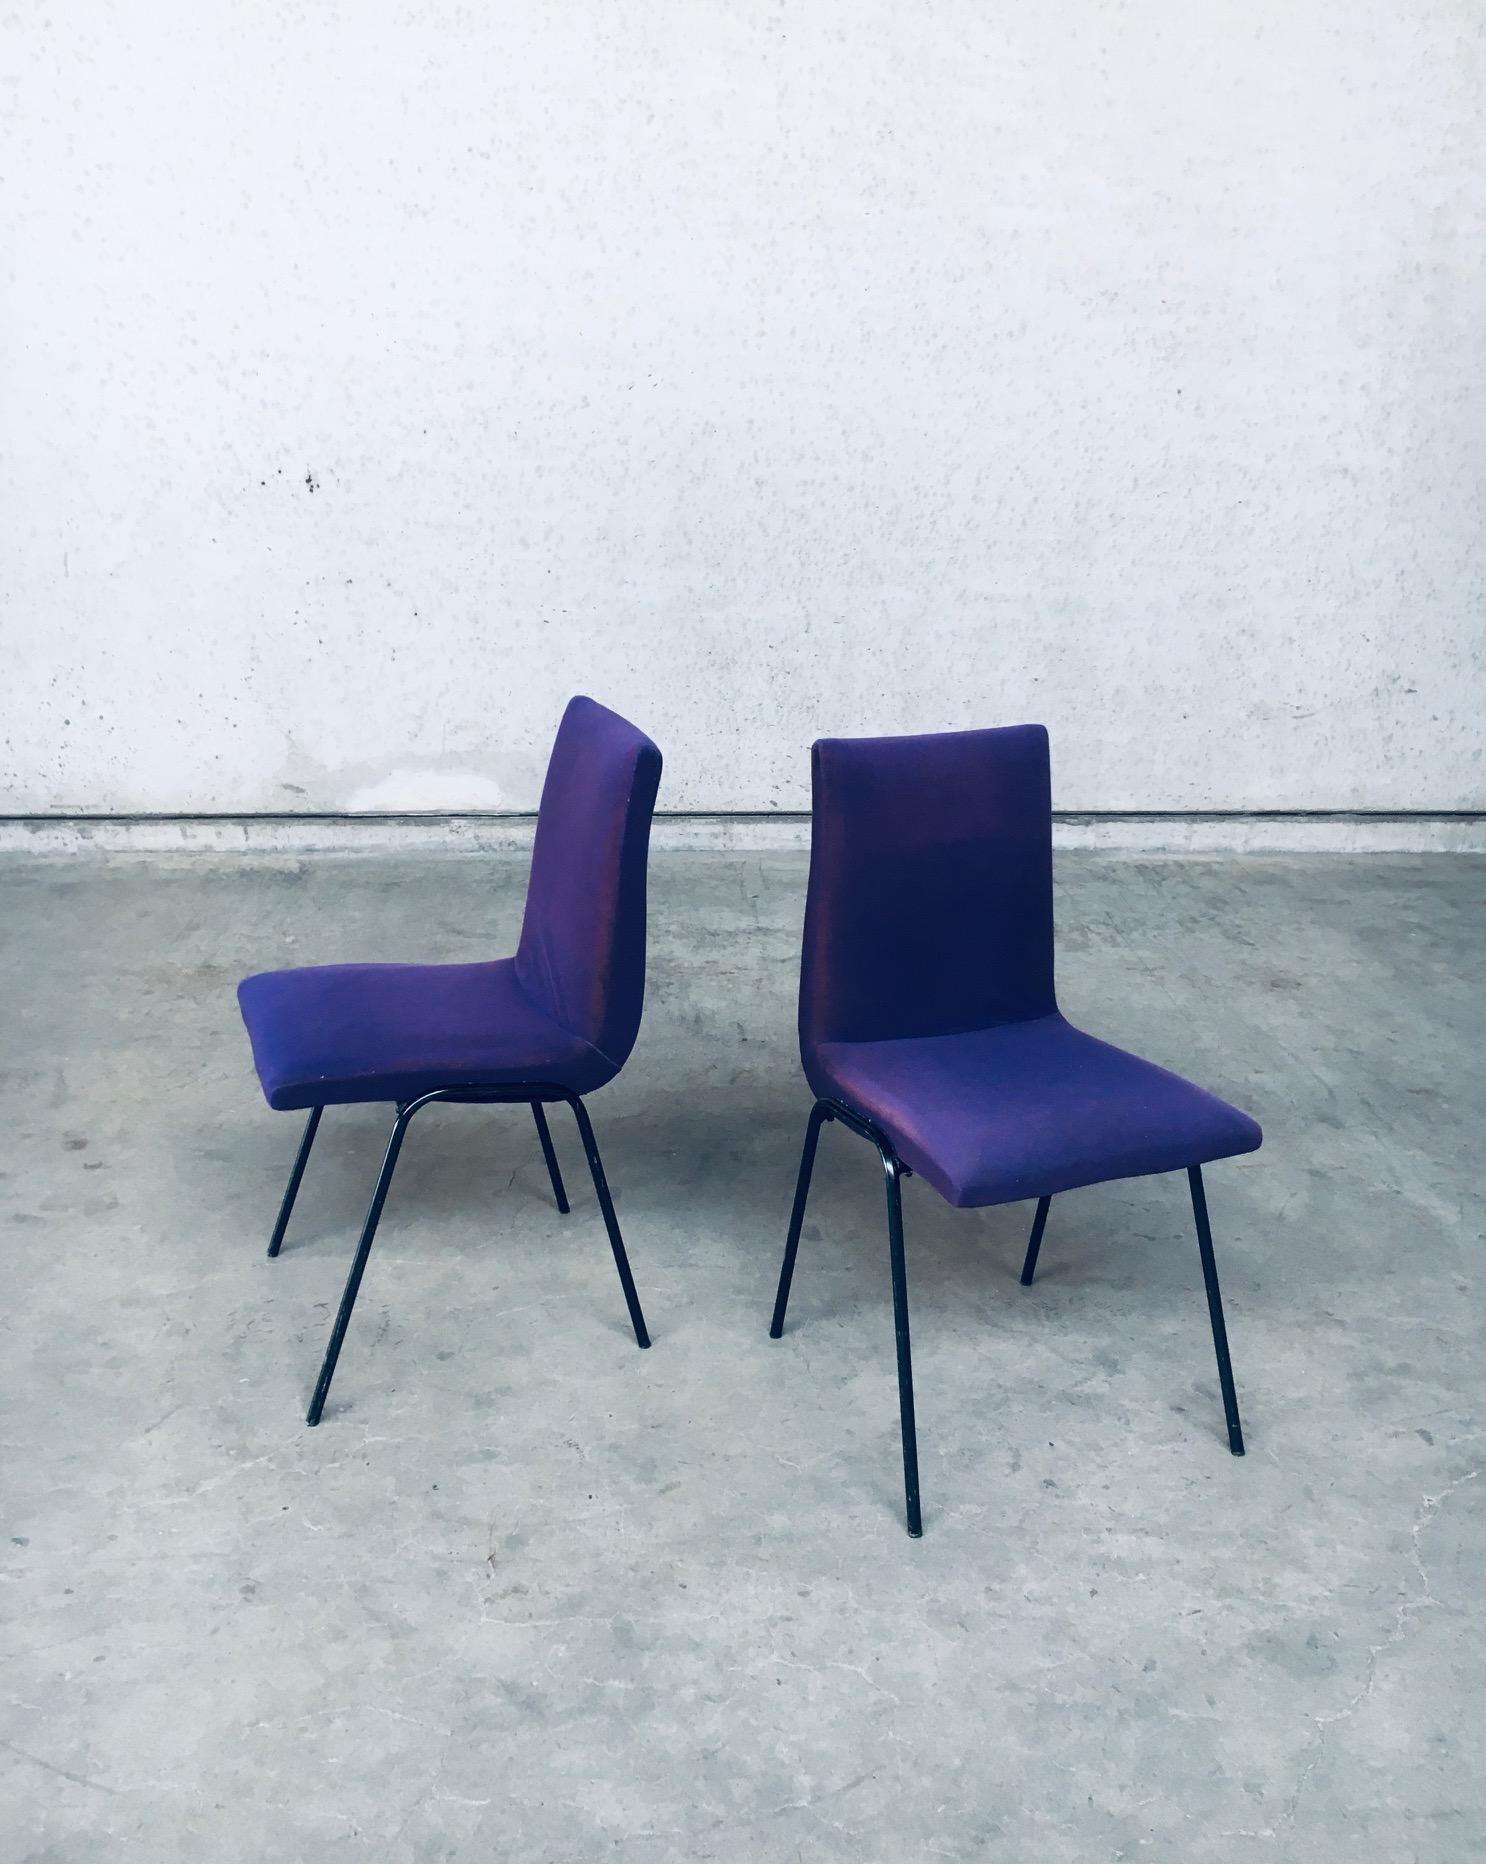 Belgian Mid-Century Modern Design Robin Chair Set by Pierre Guariche for Meurop, 1950's For Sale